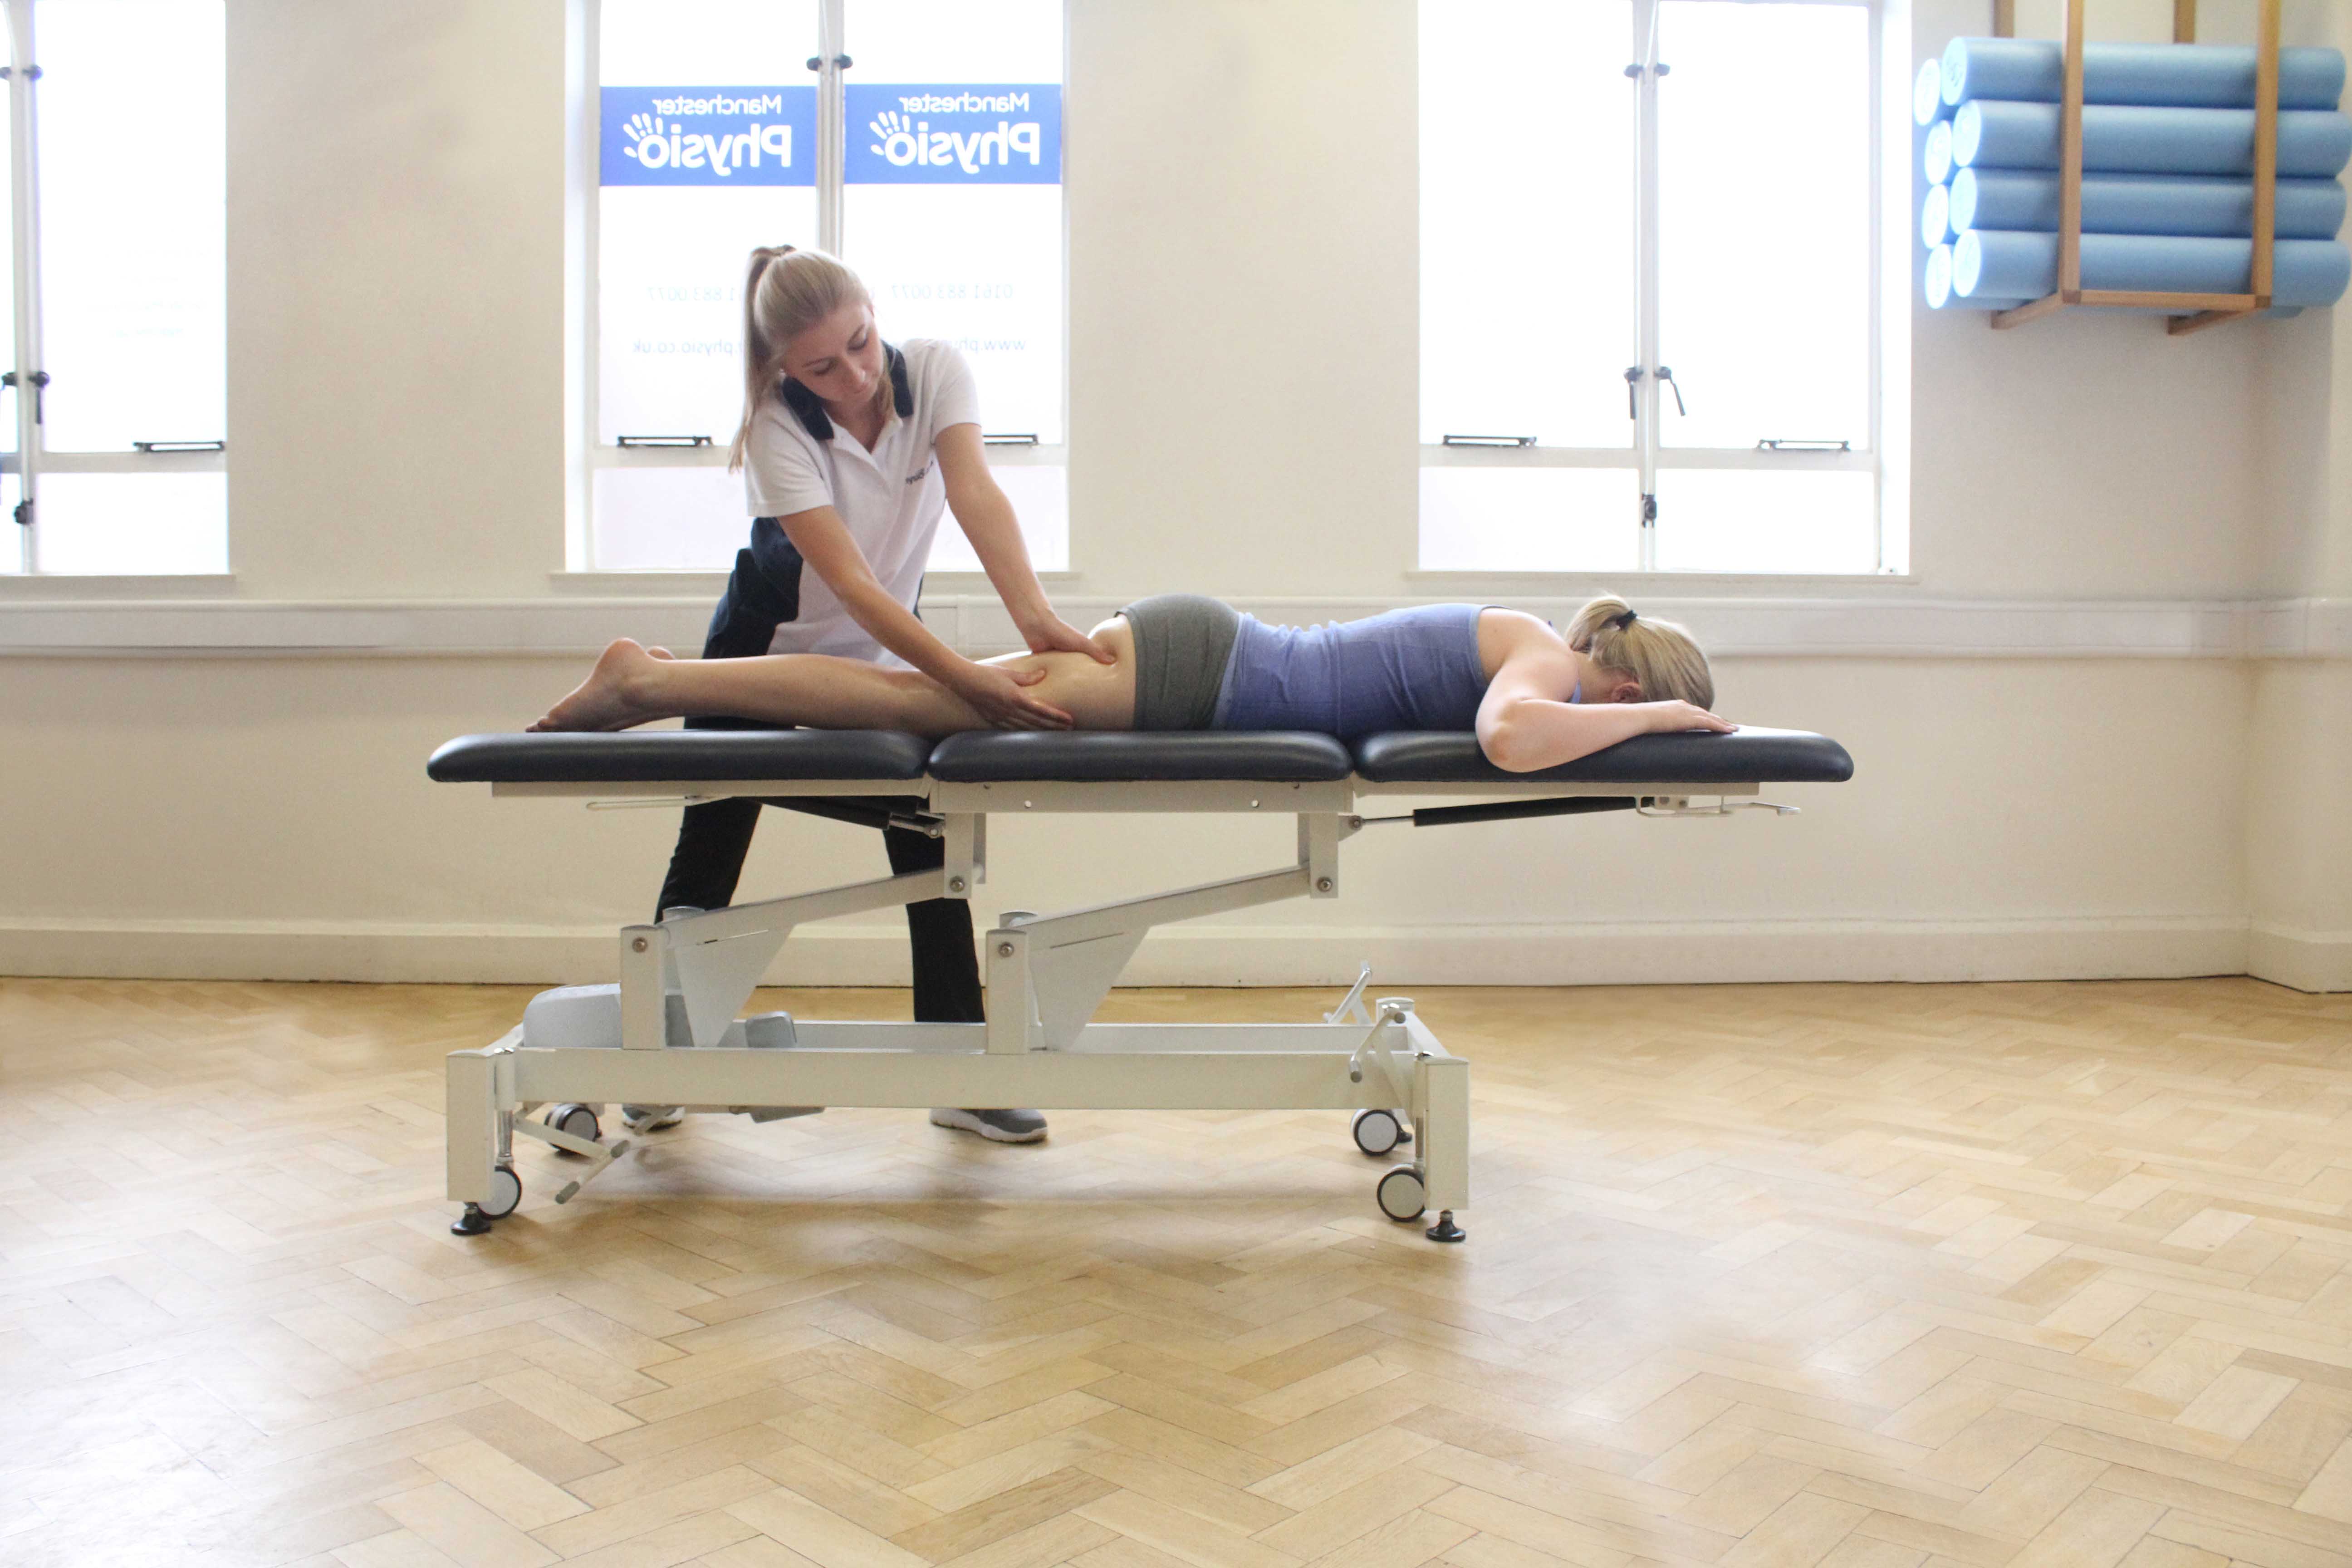 Soft tissue massage applied to the hamstring muscles following sports